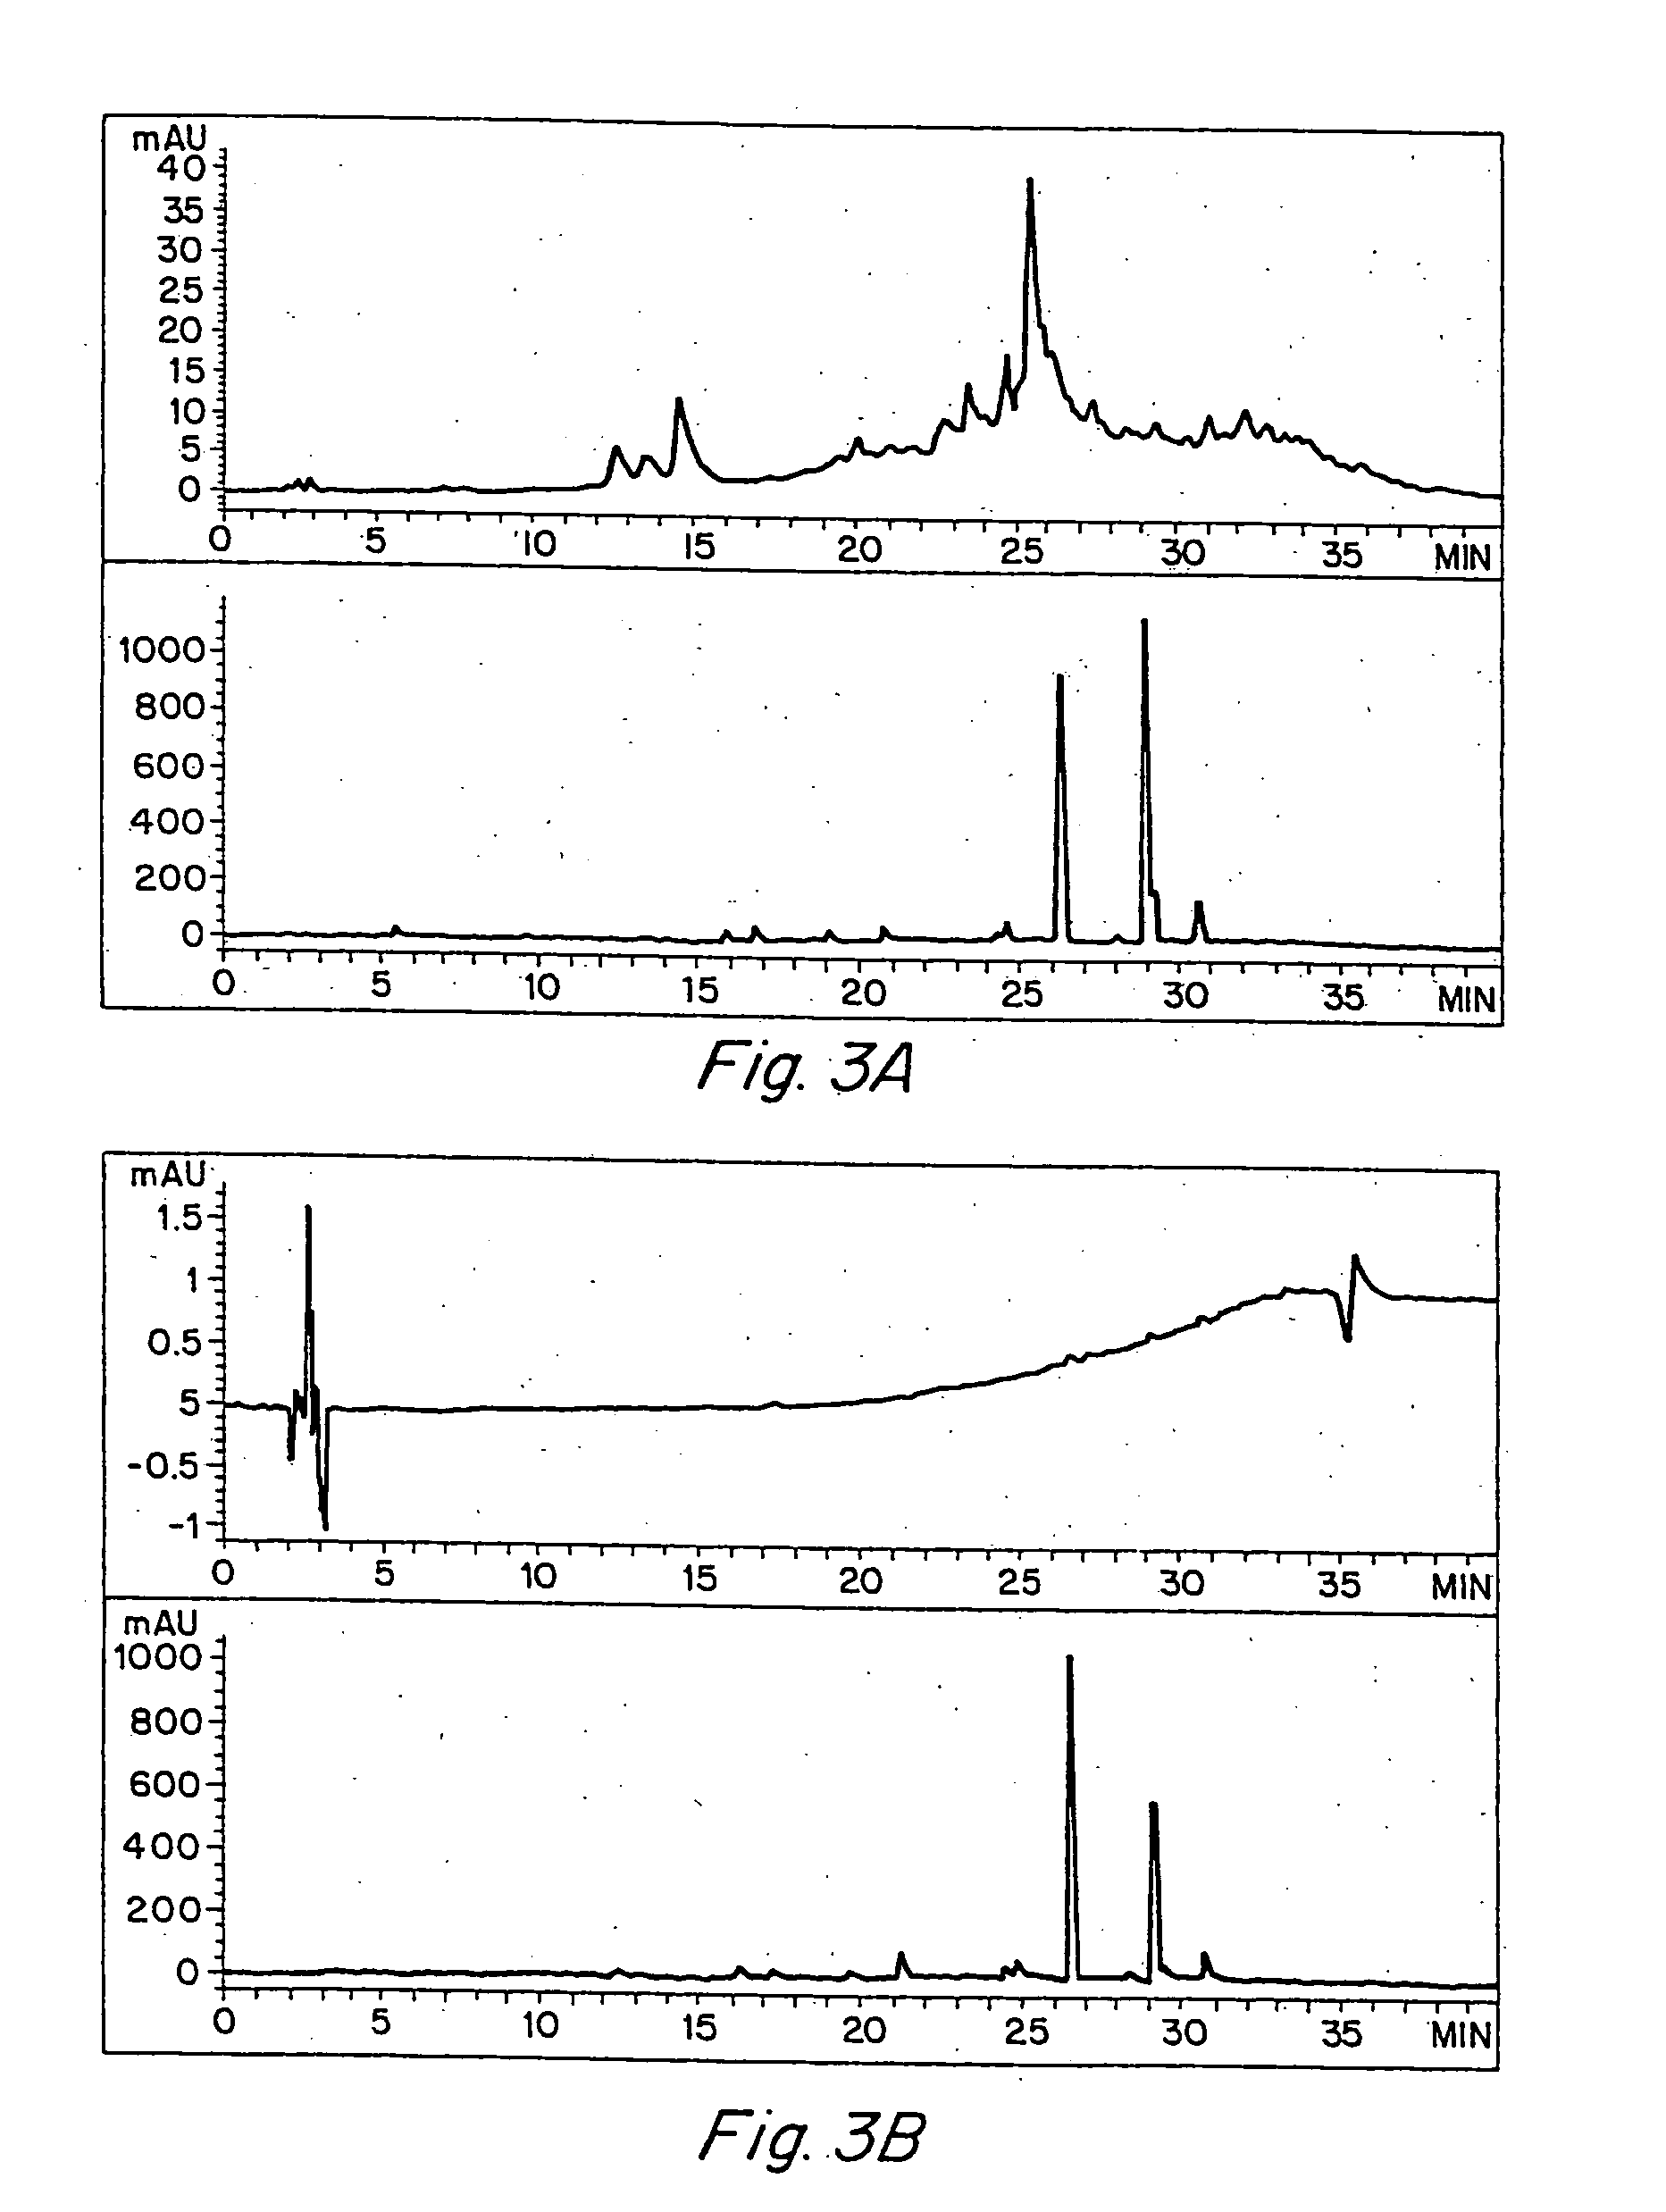 Anti-inflammatory activity of a specific turmeric extract